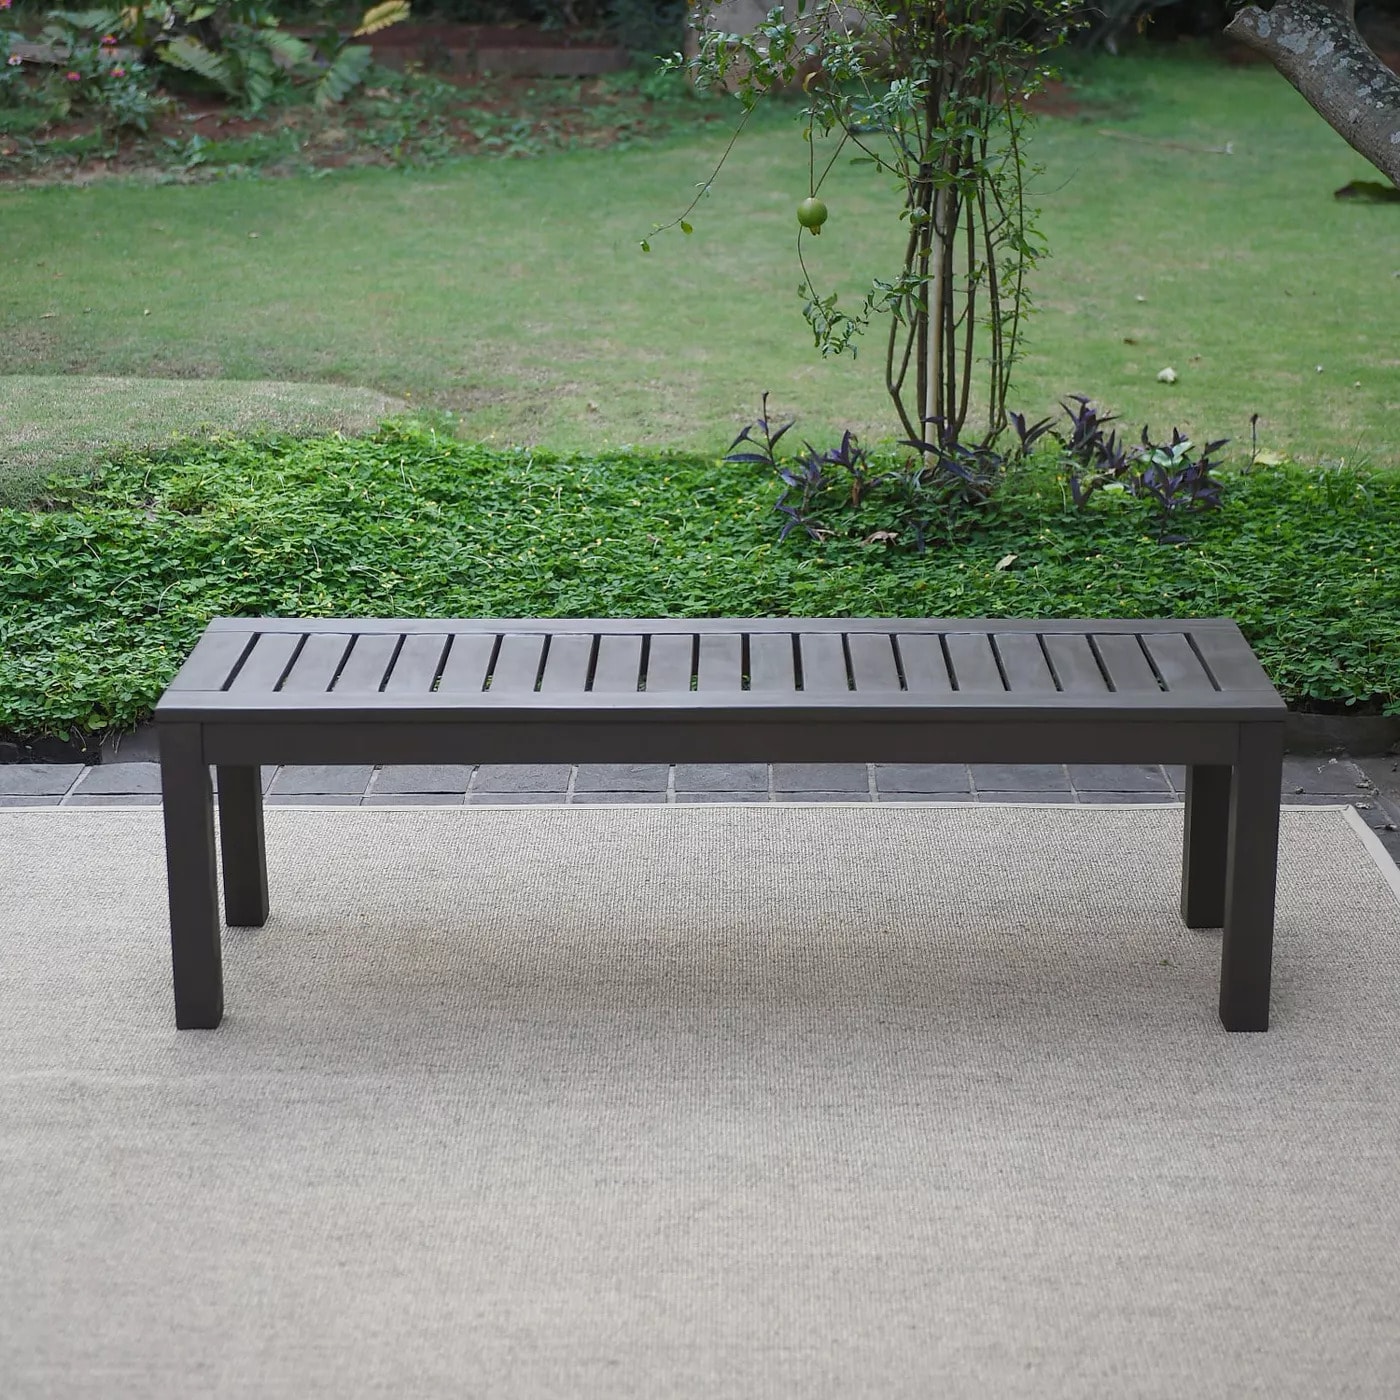 Cambridge Casual Braga 55-in W Gray the x in H department 17-in Bench Dark Benches at Patio Dining